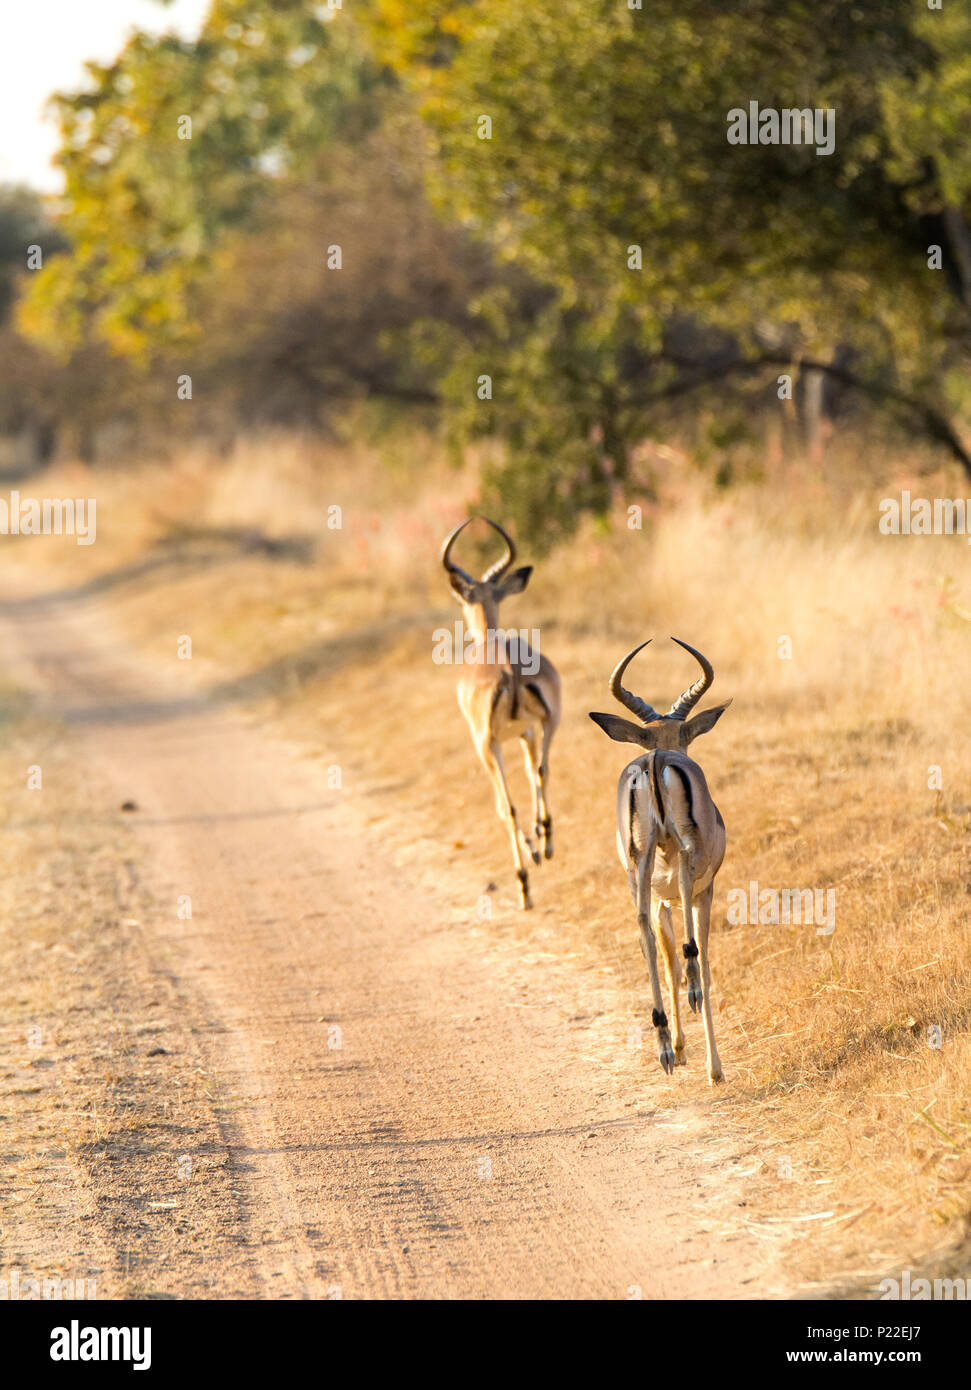 Two impala antelopes run beside a dirt track on safari in south africa Stock Photo